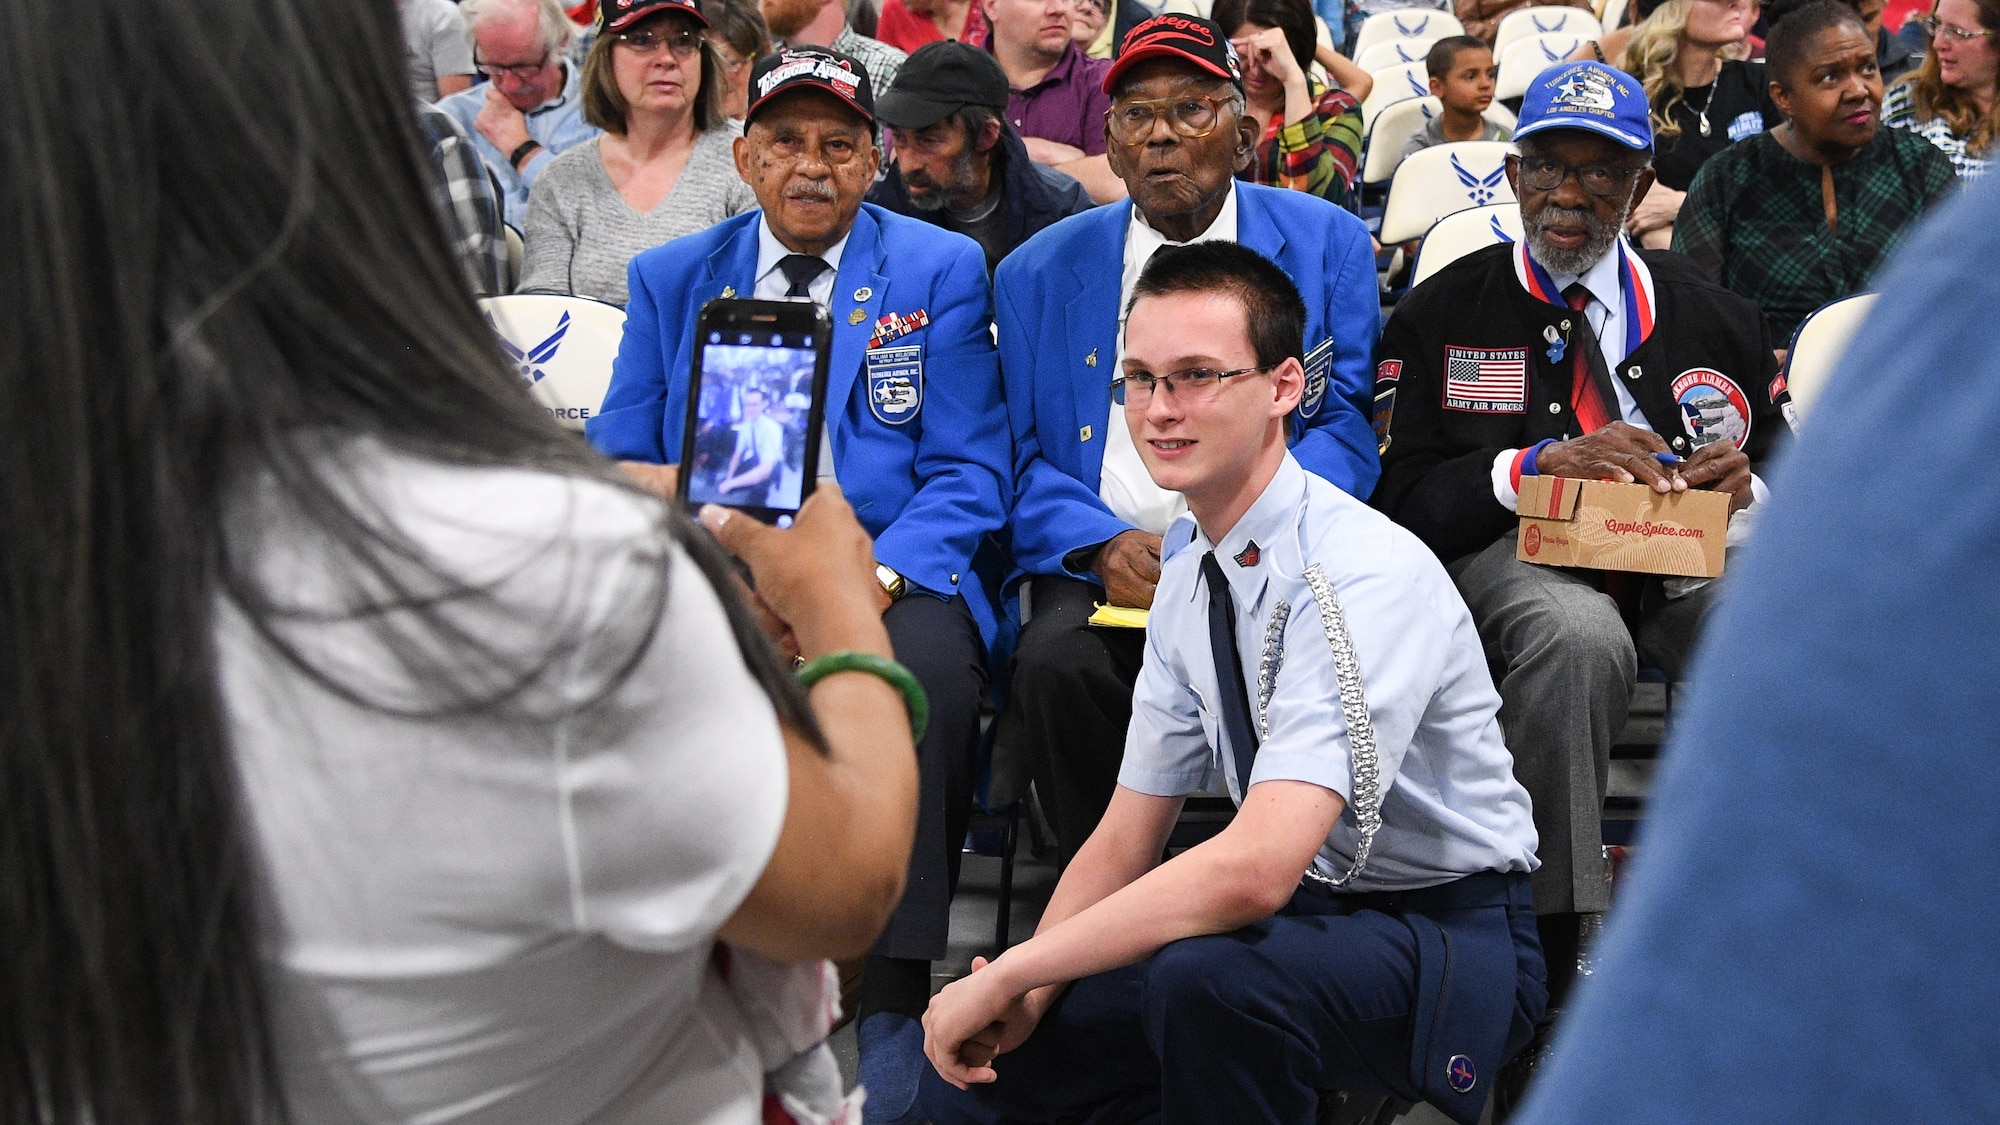 Utah Military Academy Cadet Burningham poses for a photo with Tuskegee Airmen, from left, William Wellborne, Frederick Henry, and Theodore Lumpkin, during an event at Hill Air Force Base, Utah, April 20, 2018. Tuskegee Airman and their families shared their experiences during the event sponsored by the Utah Military Academy, the Aerospace Heritage Foundation of Utah and the Hill AFB Museum. (U.S. Air Force photo by R. Nial Bradshaw)